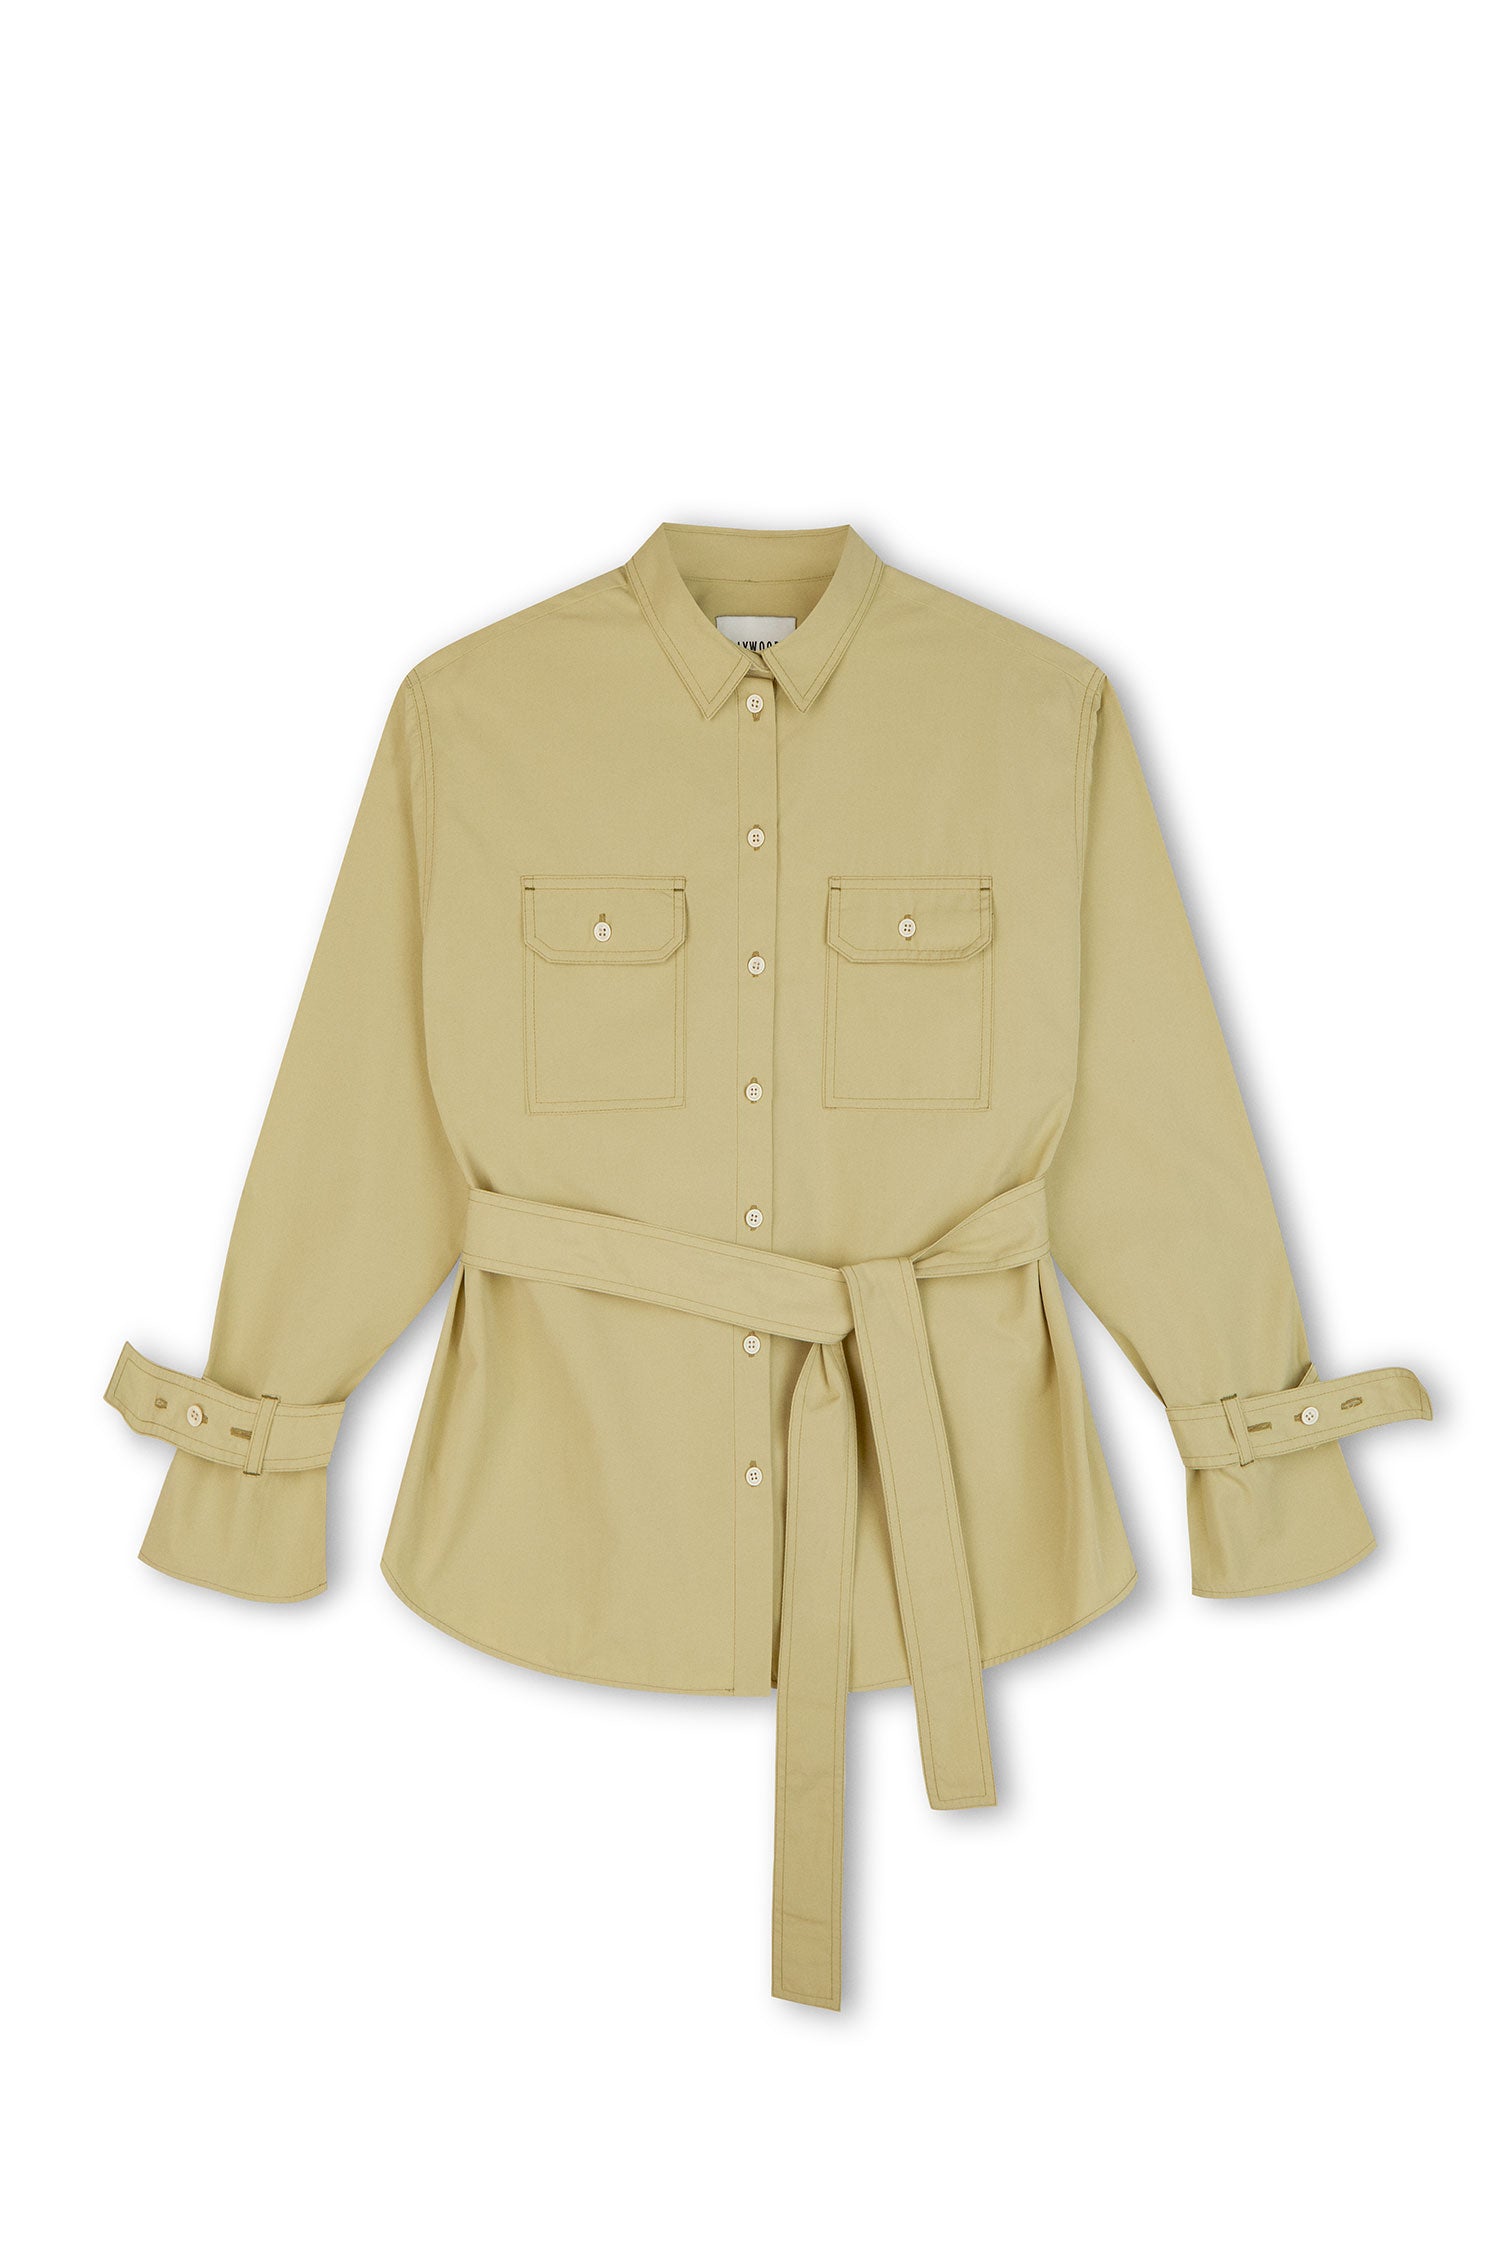 Womens Oversized Shirt in khaki olive, with detachable tie belt and safari styling details. Belted cuffs for sleeve details and utility patch pockets. Zadie Boyfriend Shirt by Saywood